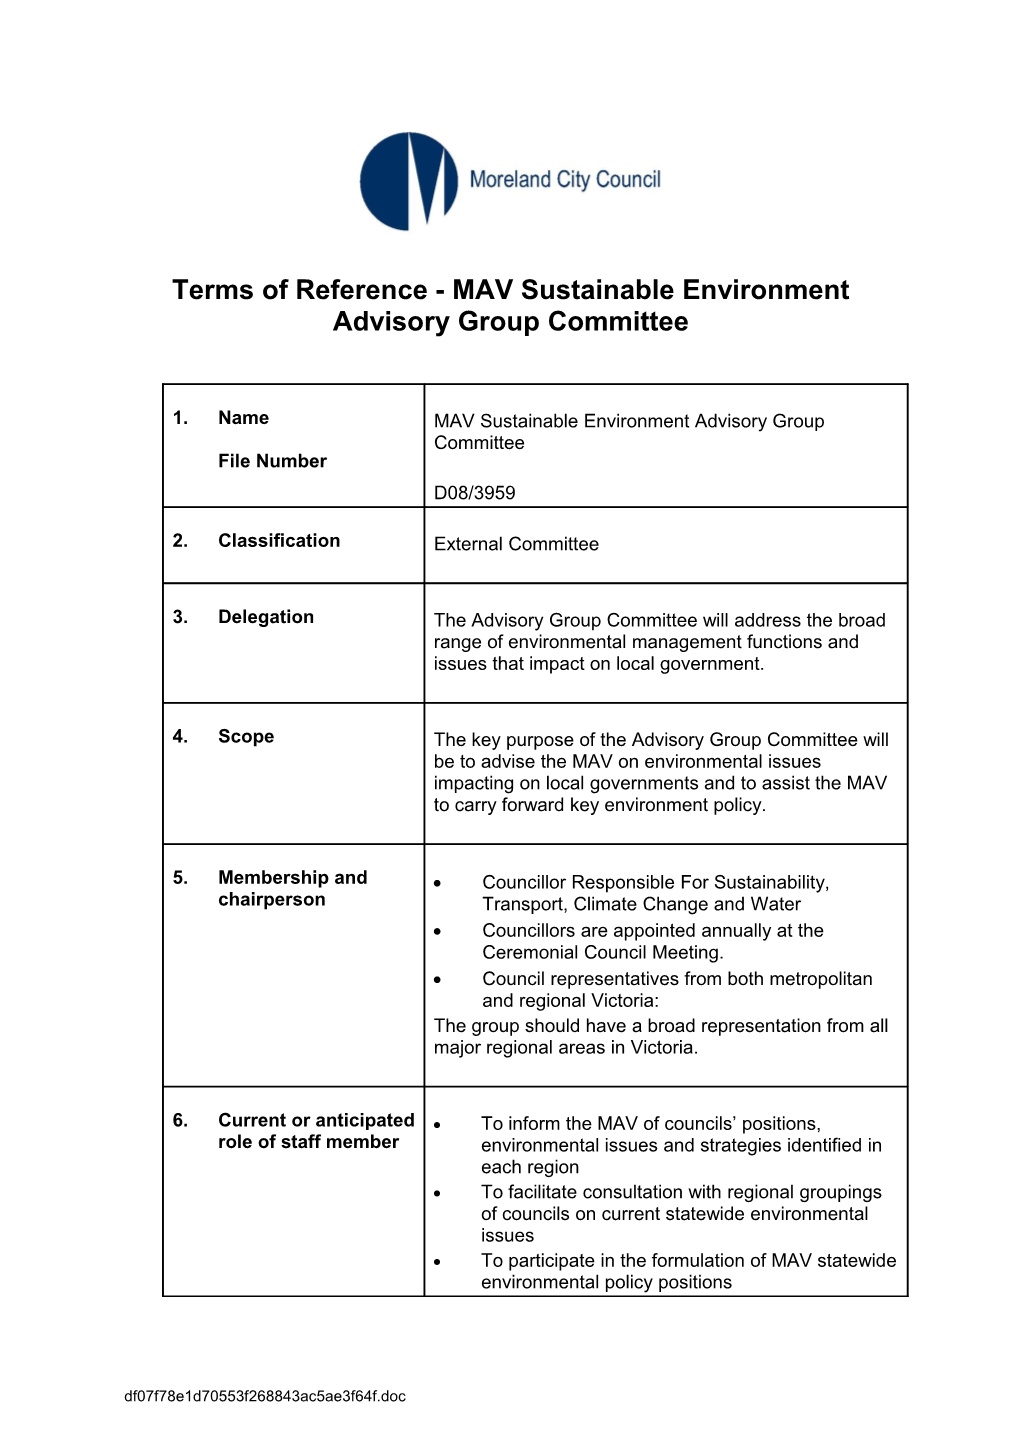 Terms of Reference - MAV Sustainable Environment Advisory Group Committee